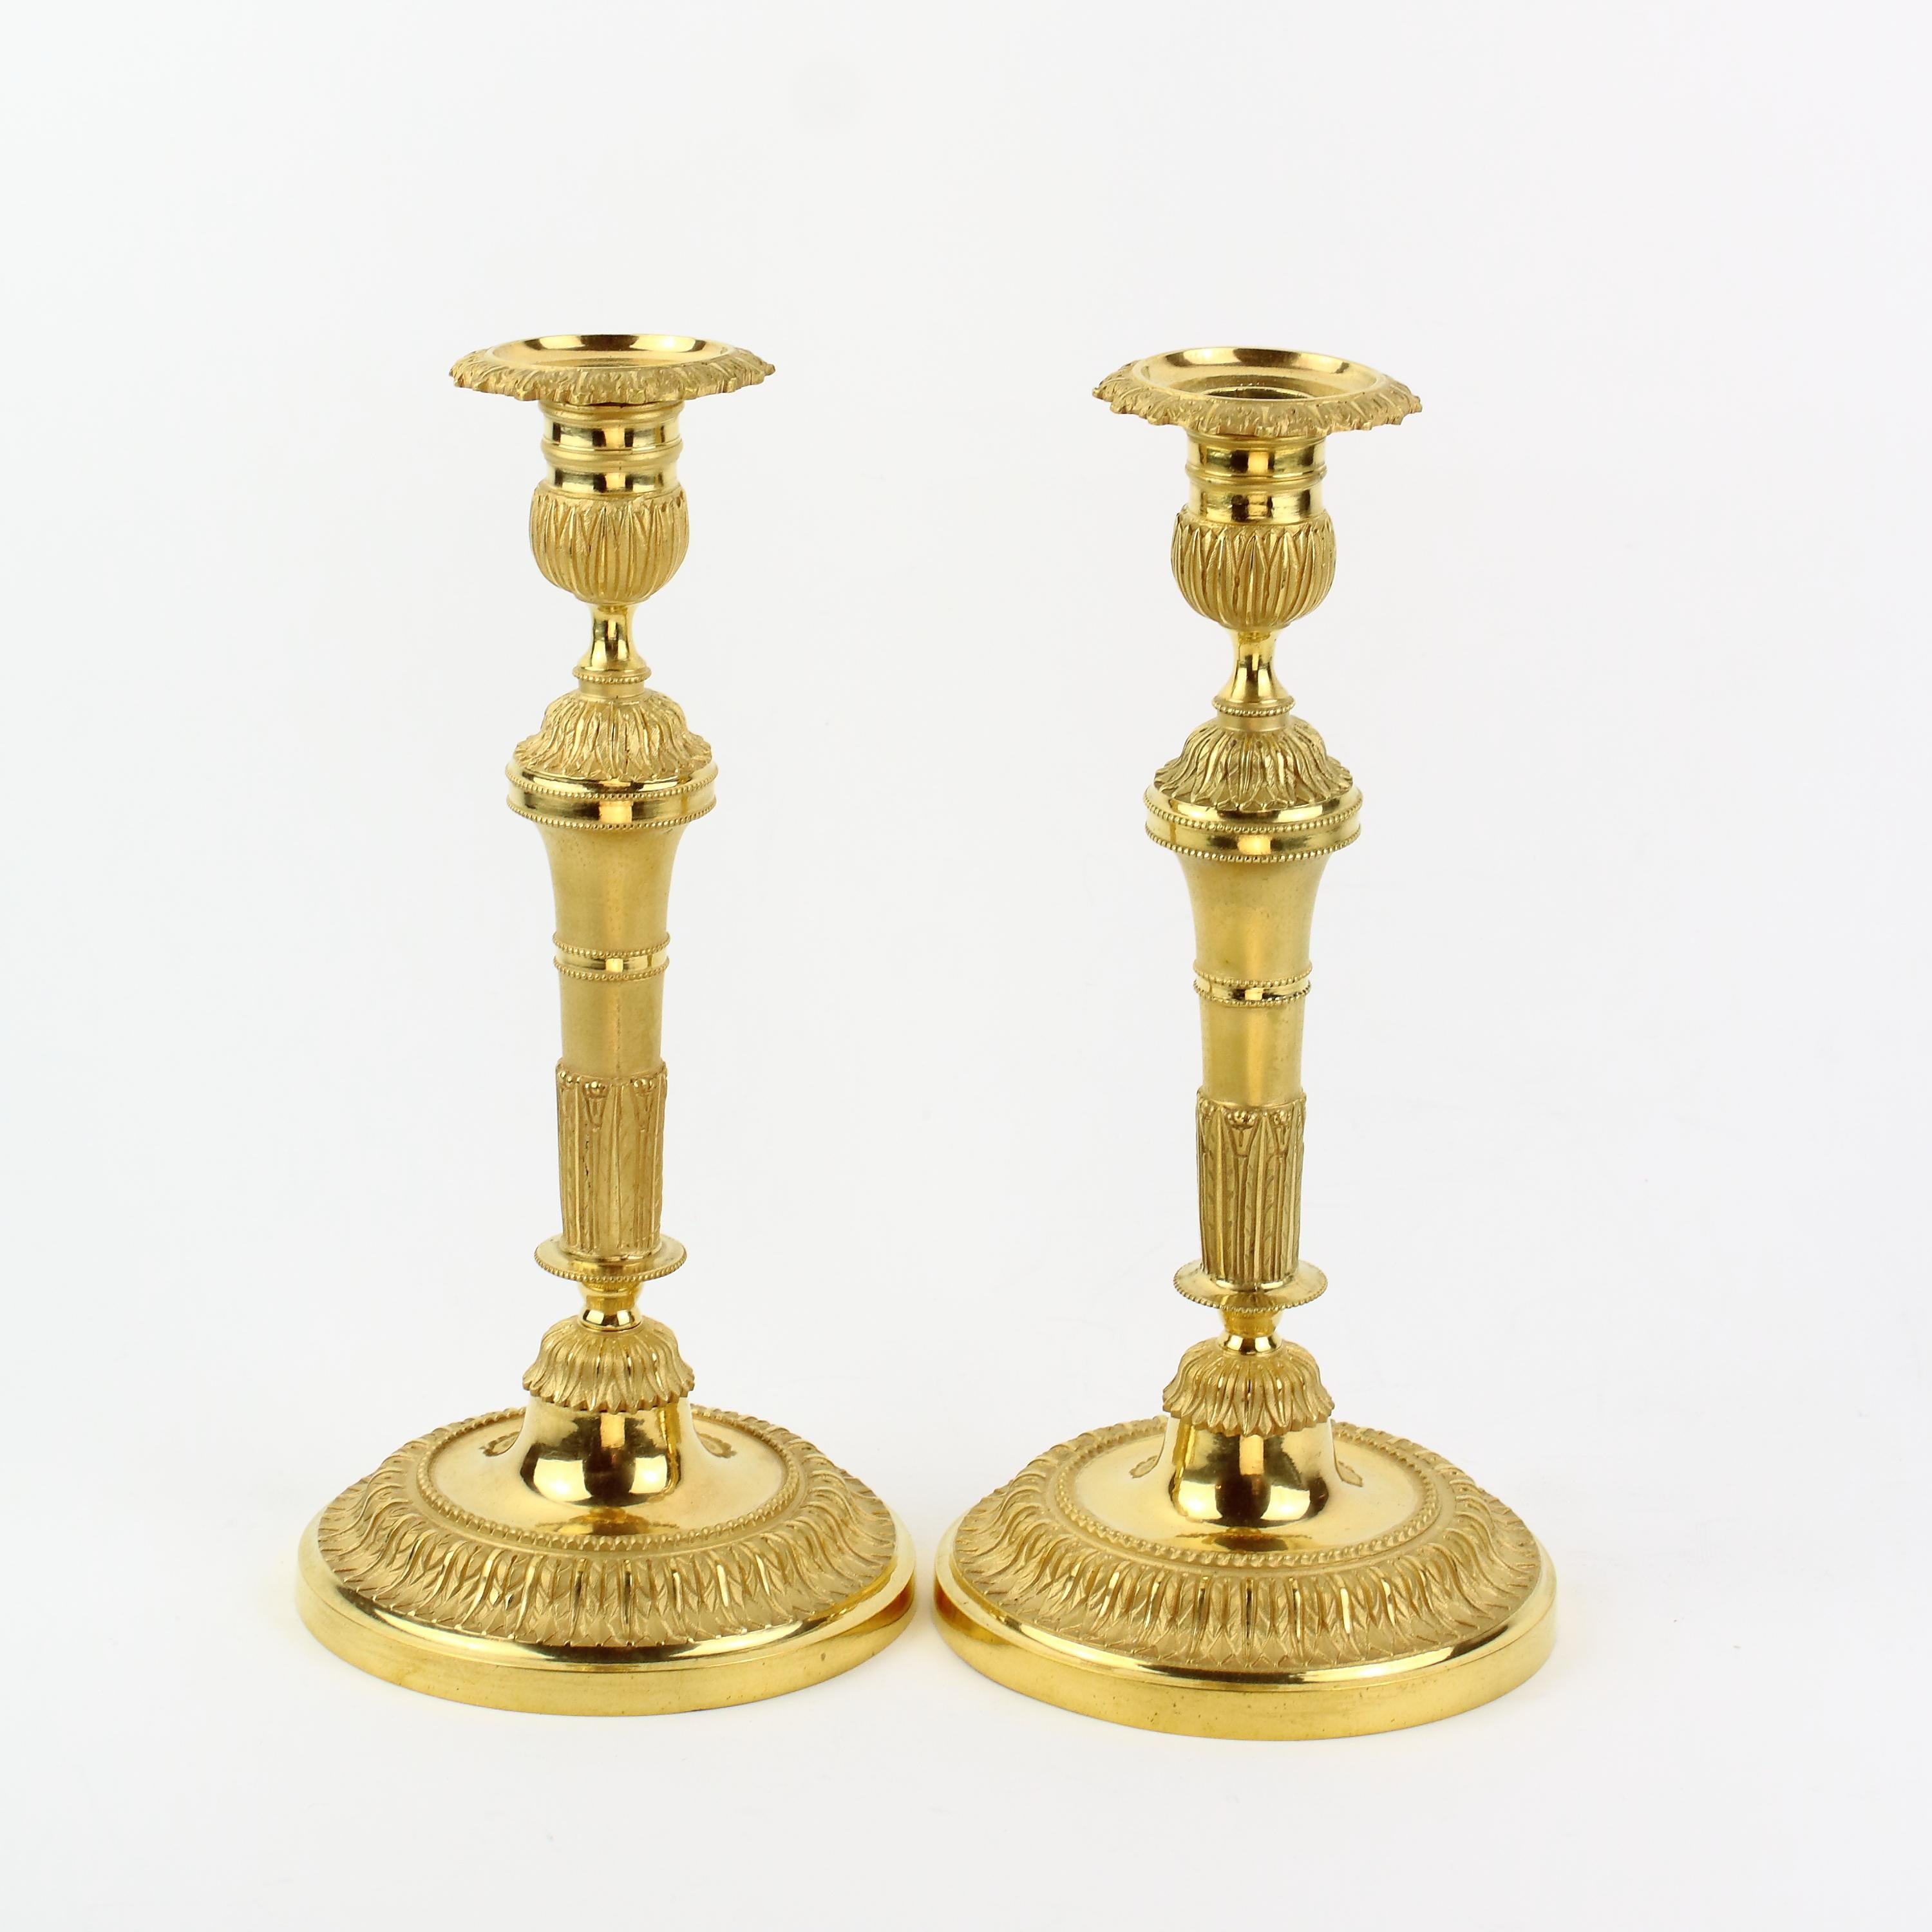 French Pair of 18th Century Louis XVI Neoclassical Gilt Bronze Candlesticks